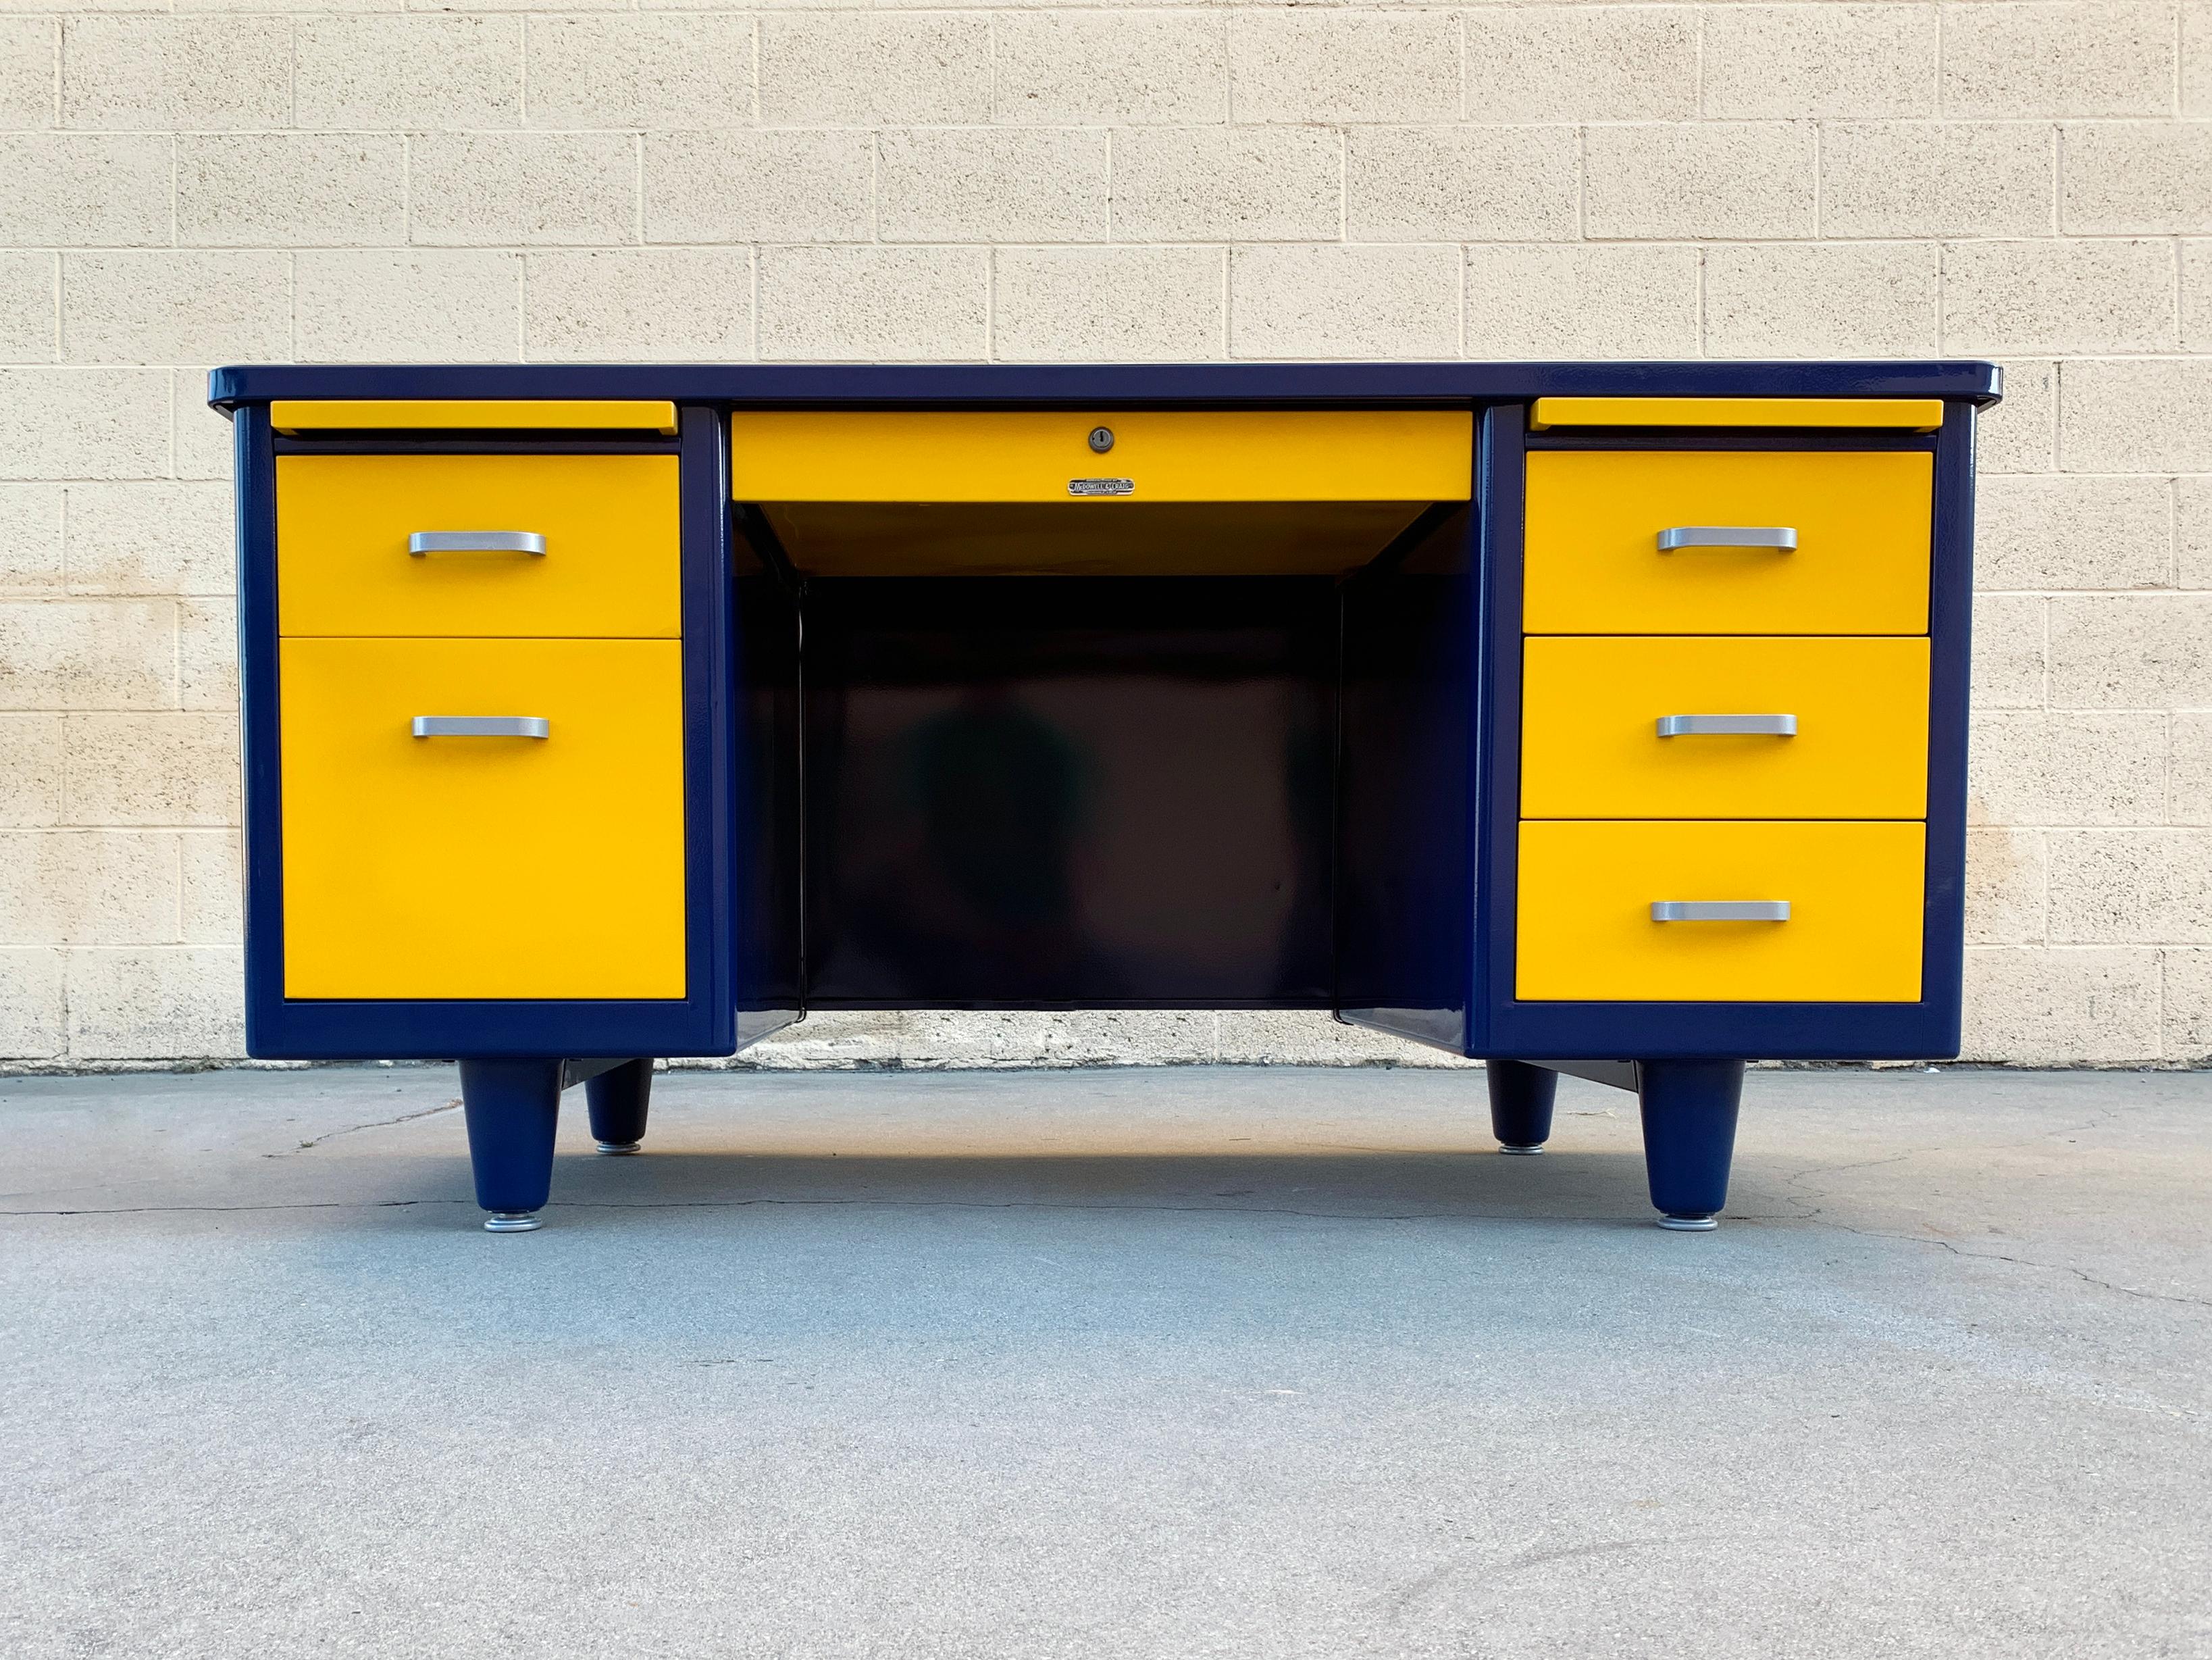 1960s Classic tanker refinished in gloss midnight blue (BL20) and yellow ochre (RAL 1003), Go Rams! This double pedestal steel desk features utility drawers, filing drawer, locking stationary drawer and letter trays. All original aluminum hardware,